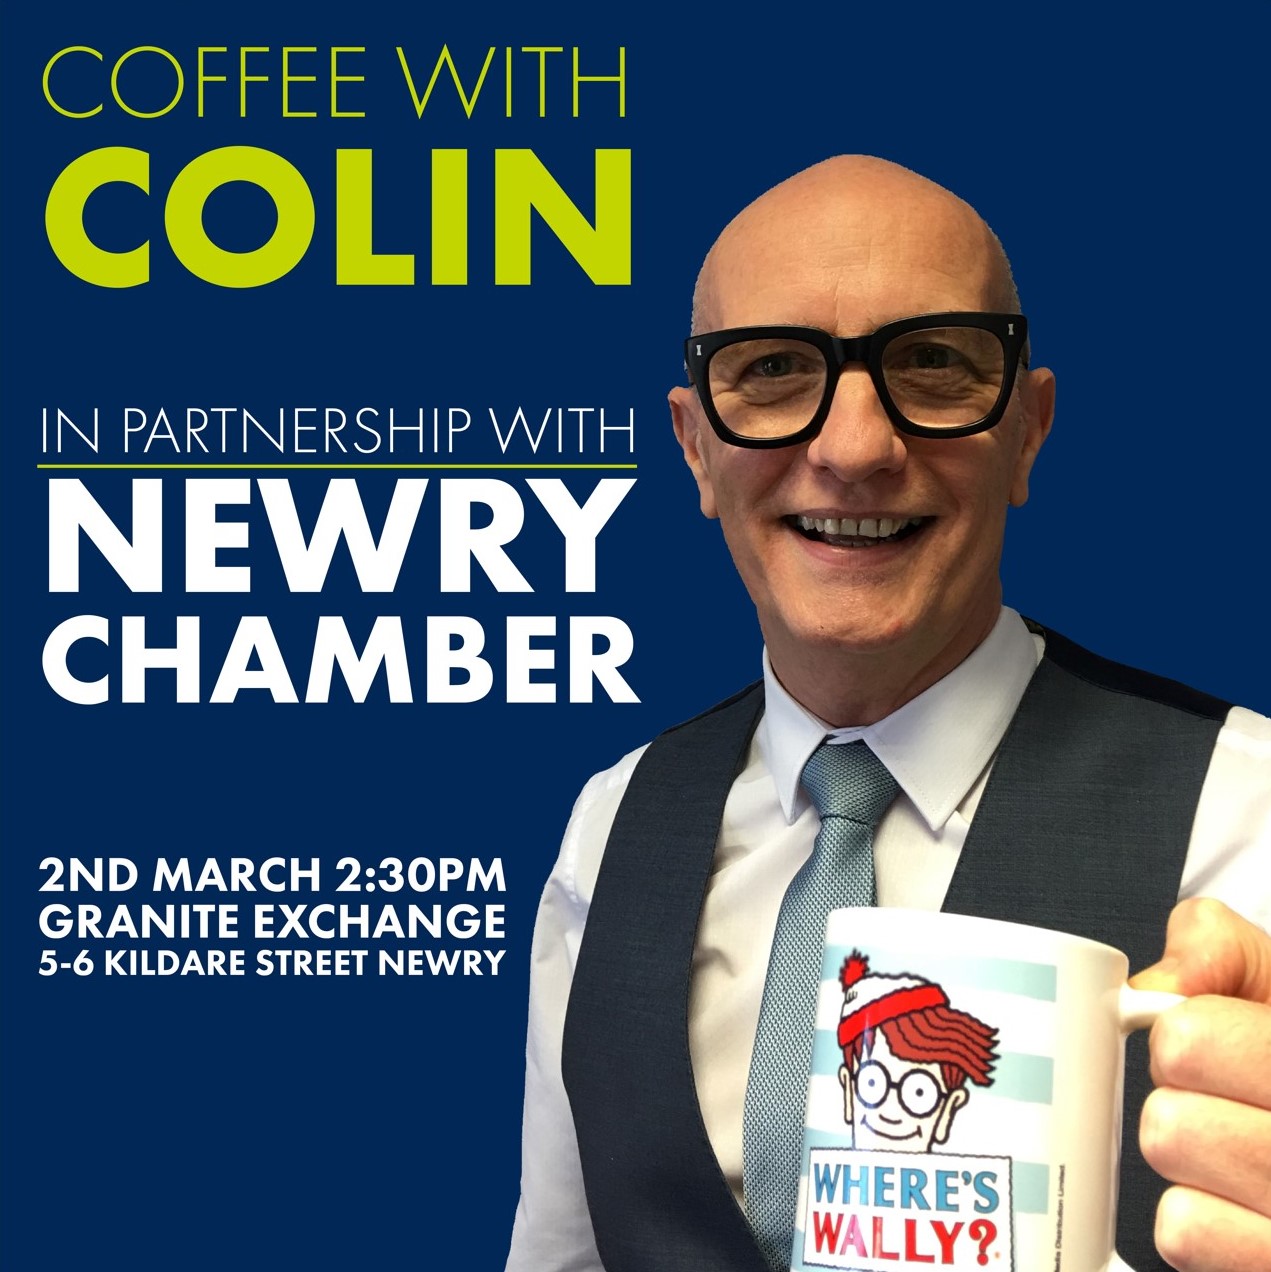 COFFEE WITH COLIN COMES TO NEWRY THIS WEDNESDAY